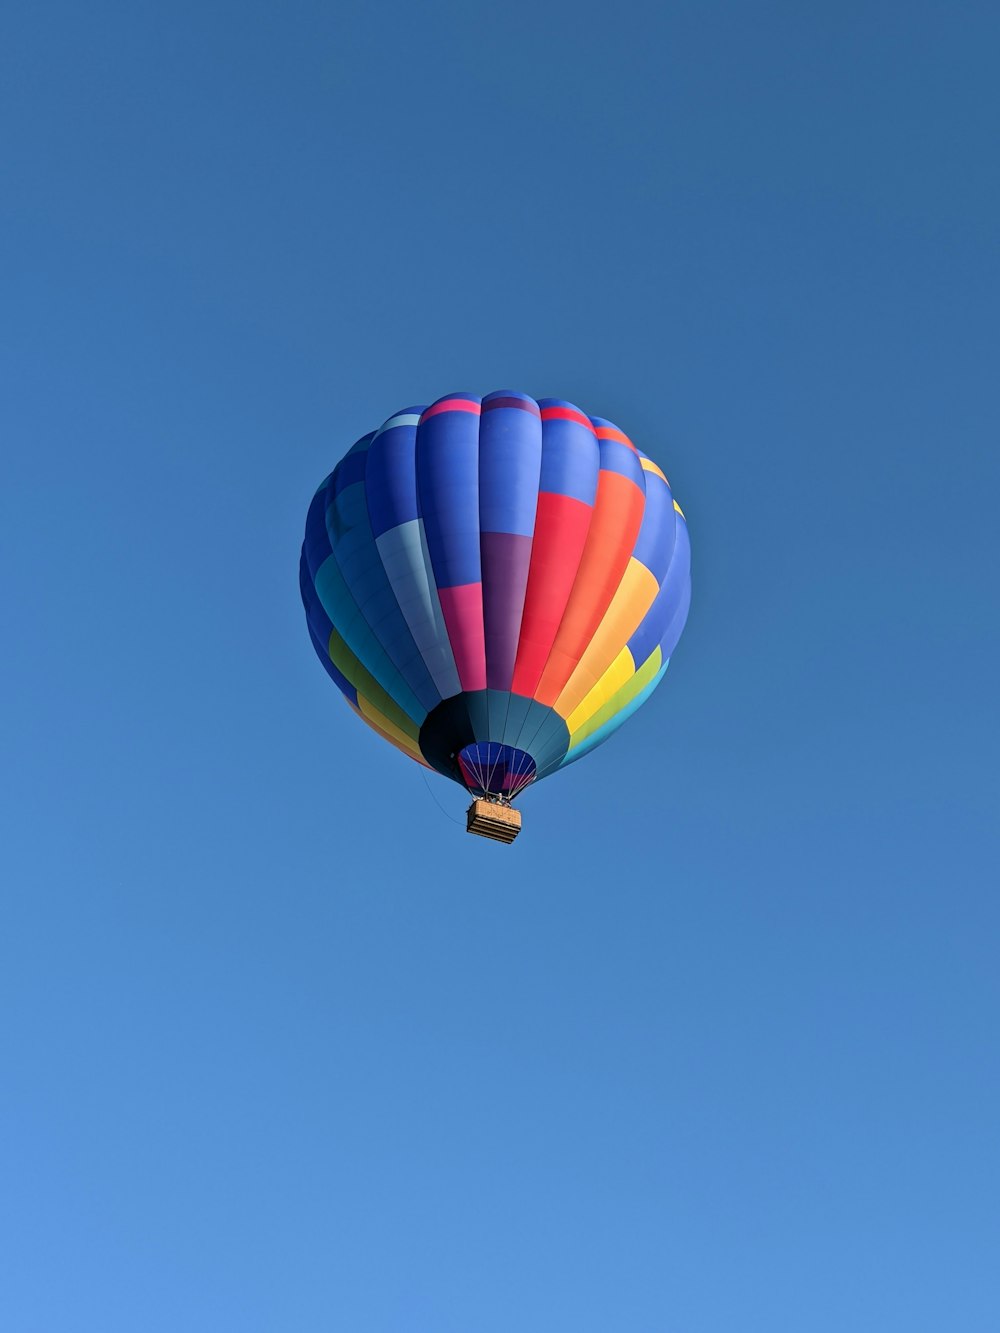 yellow blue and red hot air balloon in mid air